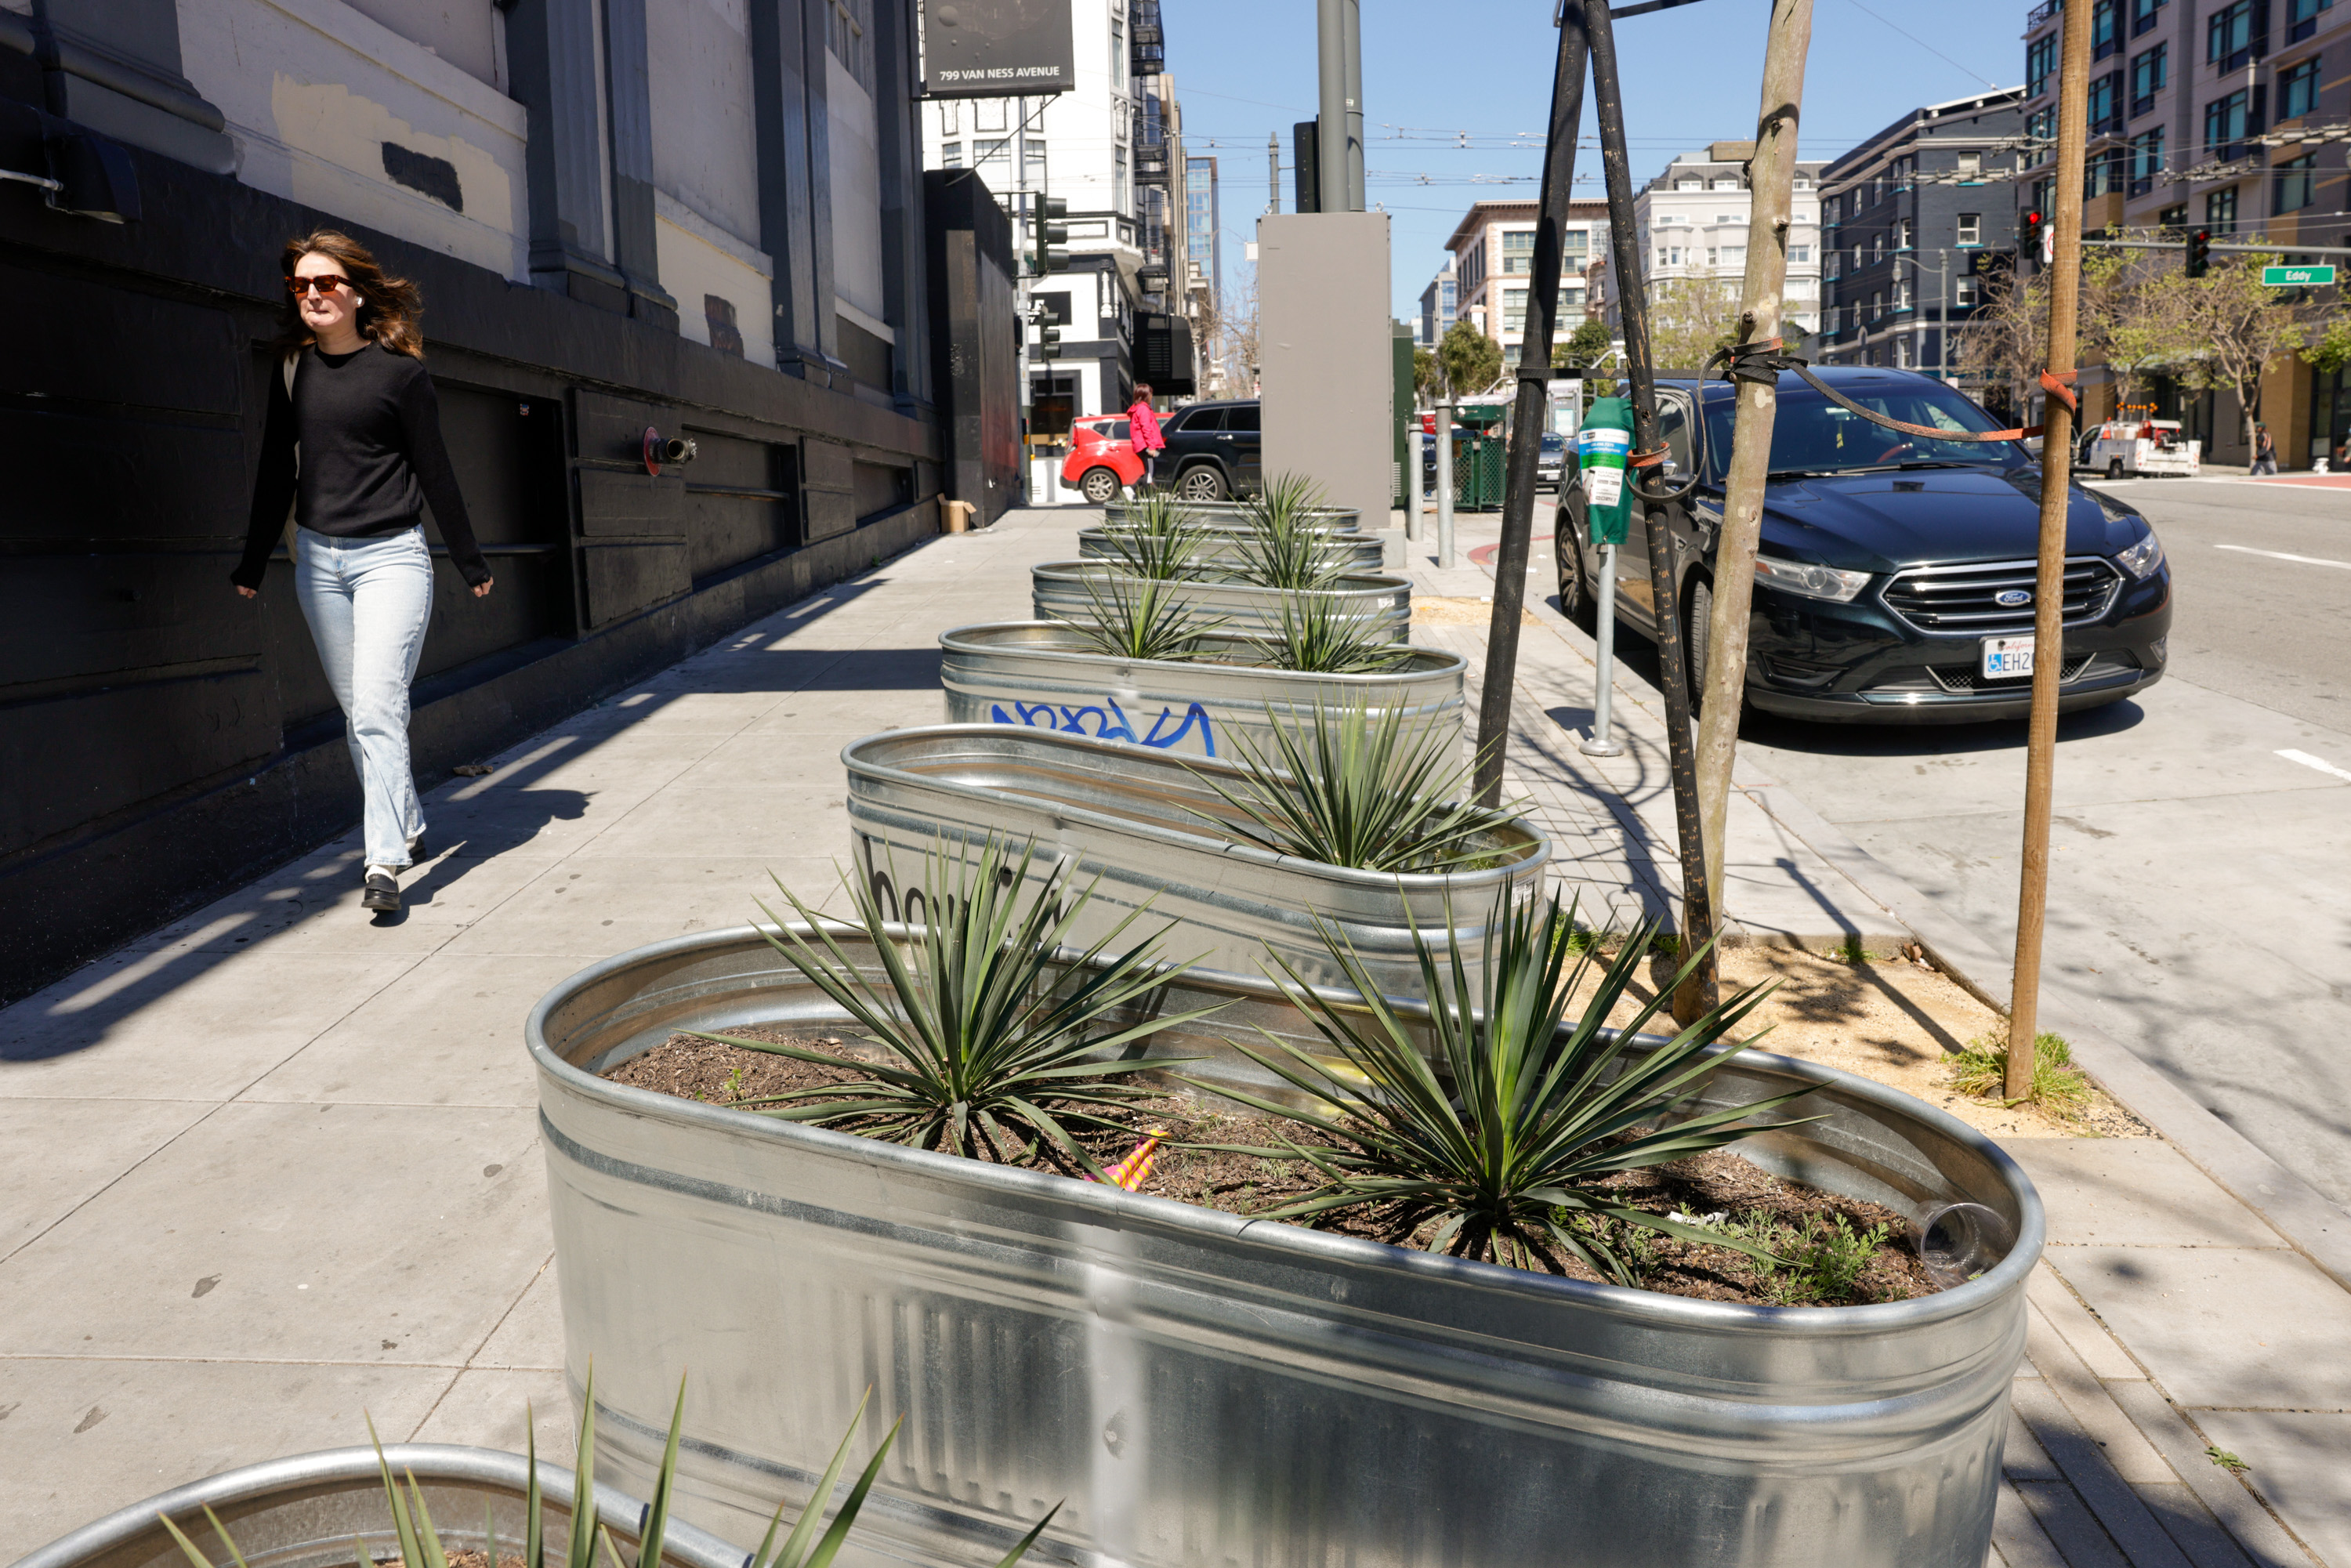 A sunny city sidewalk with large metal planters containing spiky plants; a woman walks by, cars parked in the background.